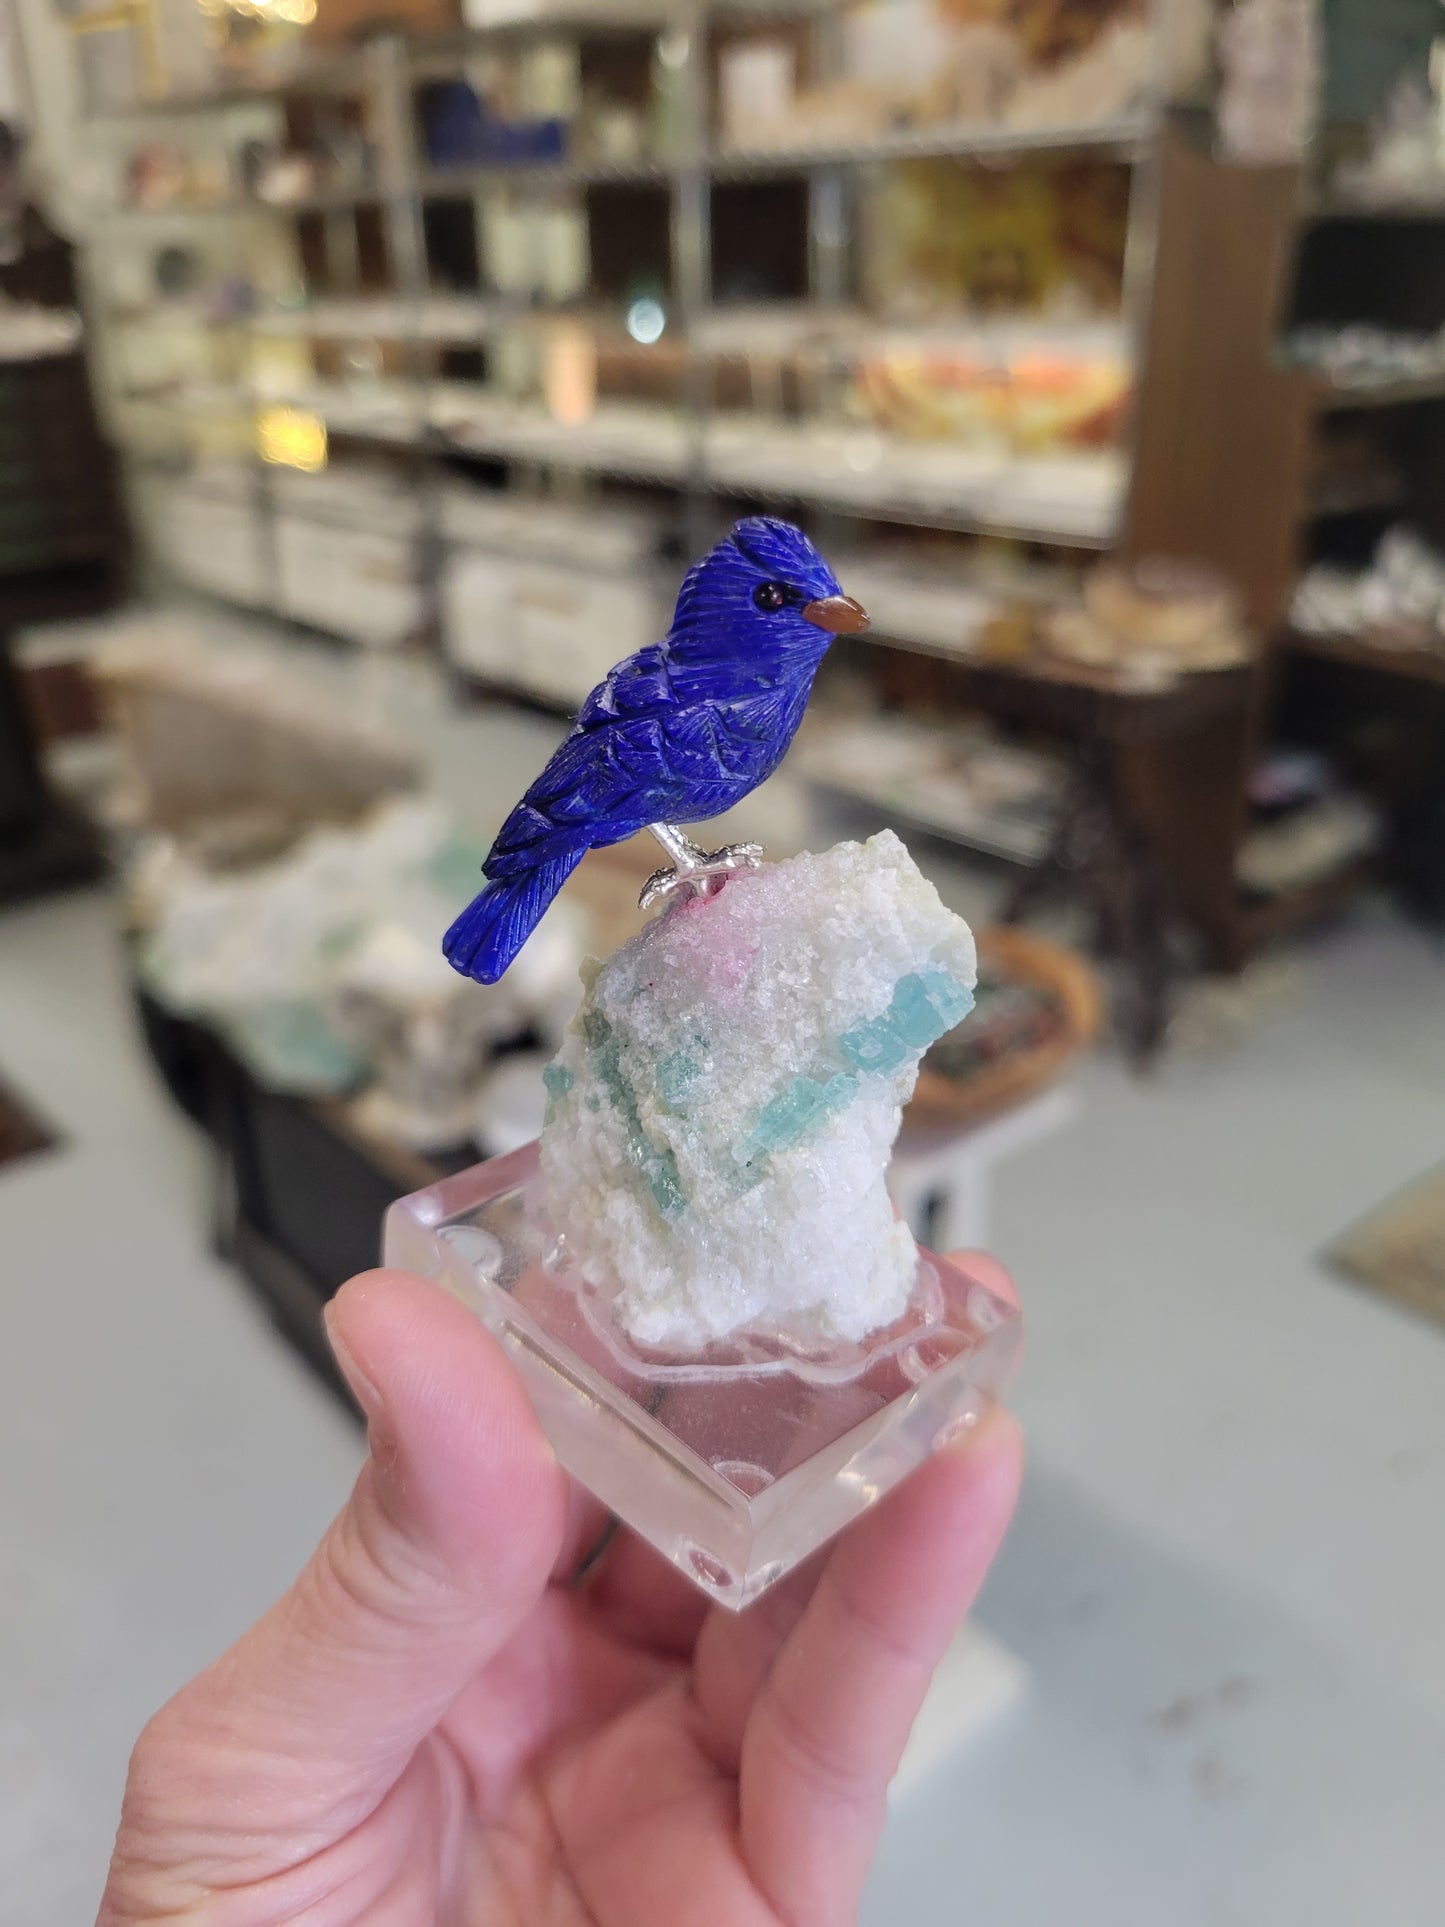 Peter Muller Collection, Lapis Lazuli Bluejay on Aquamarine and Quartz Carved and Polished in Brazil (W 3/4 X 1 3/4 (beak to tail) inches)